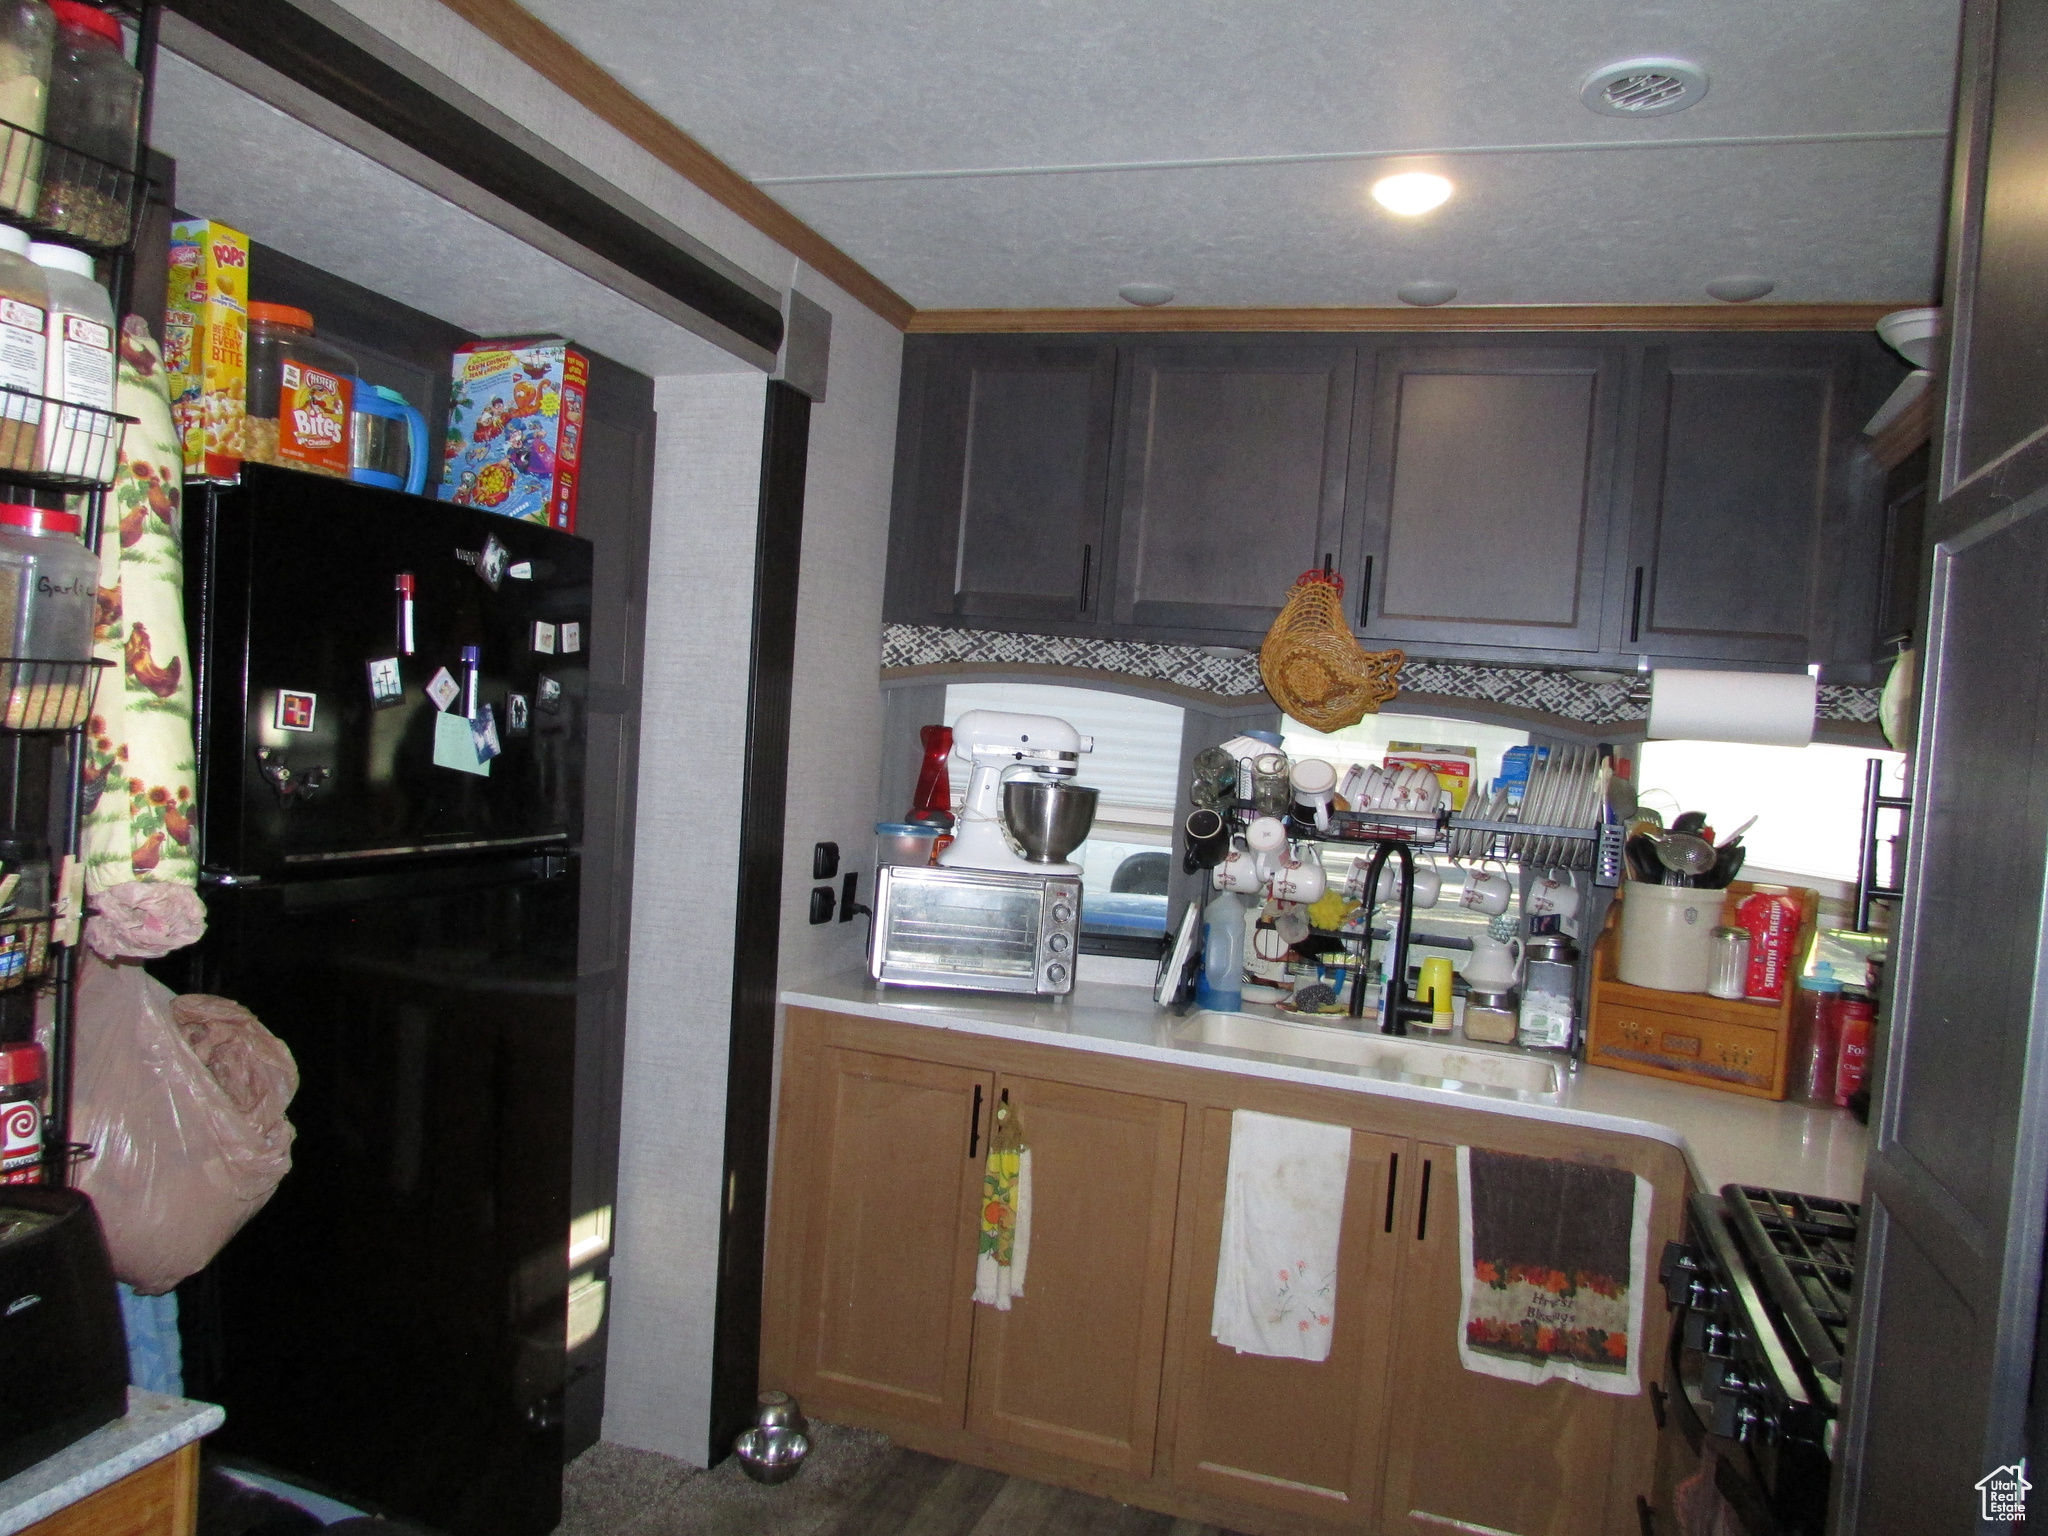 Kitchen with black refrigerator, sink, and range with gas cooktop